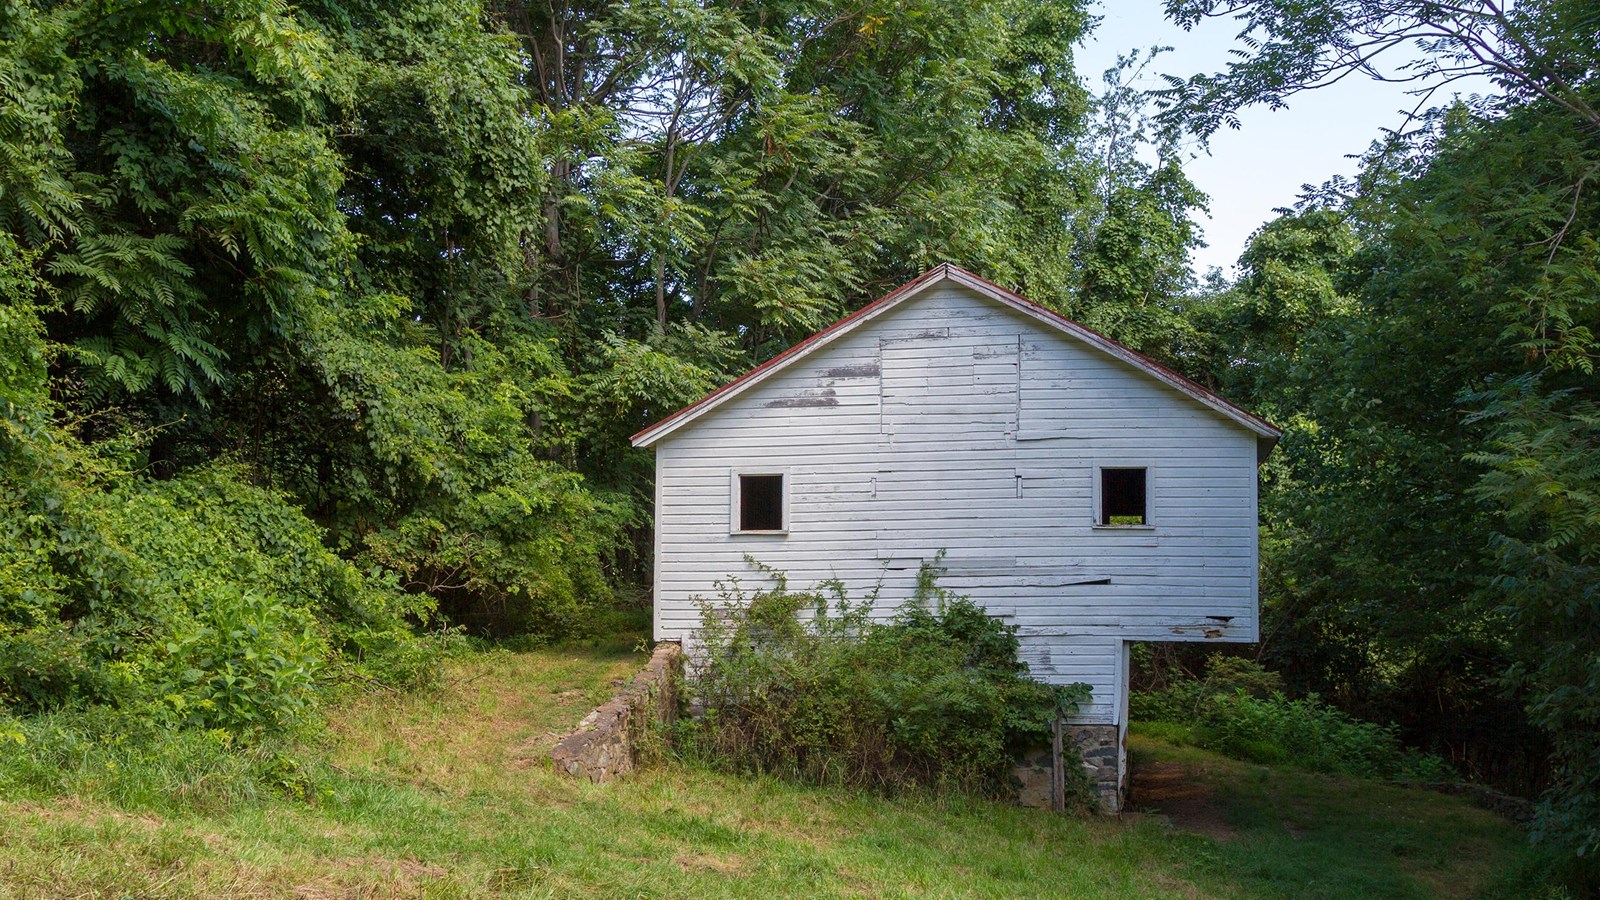 An old, white barn sits under a canopy of green trees